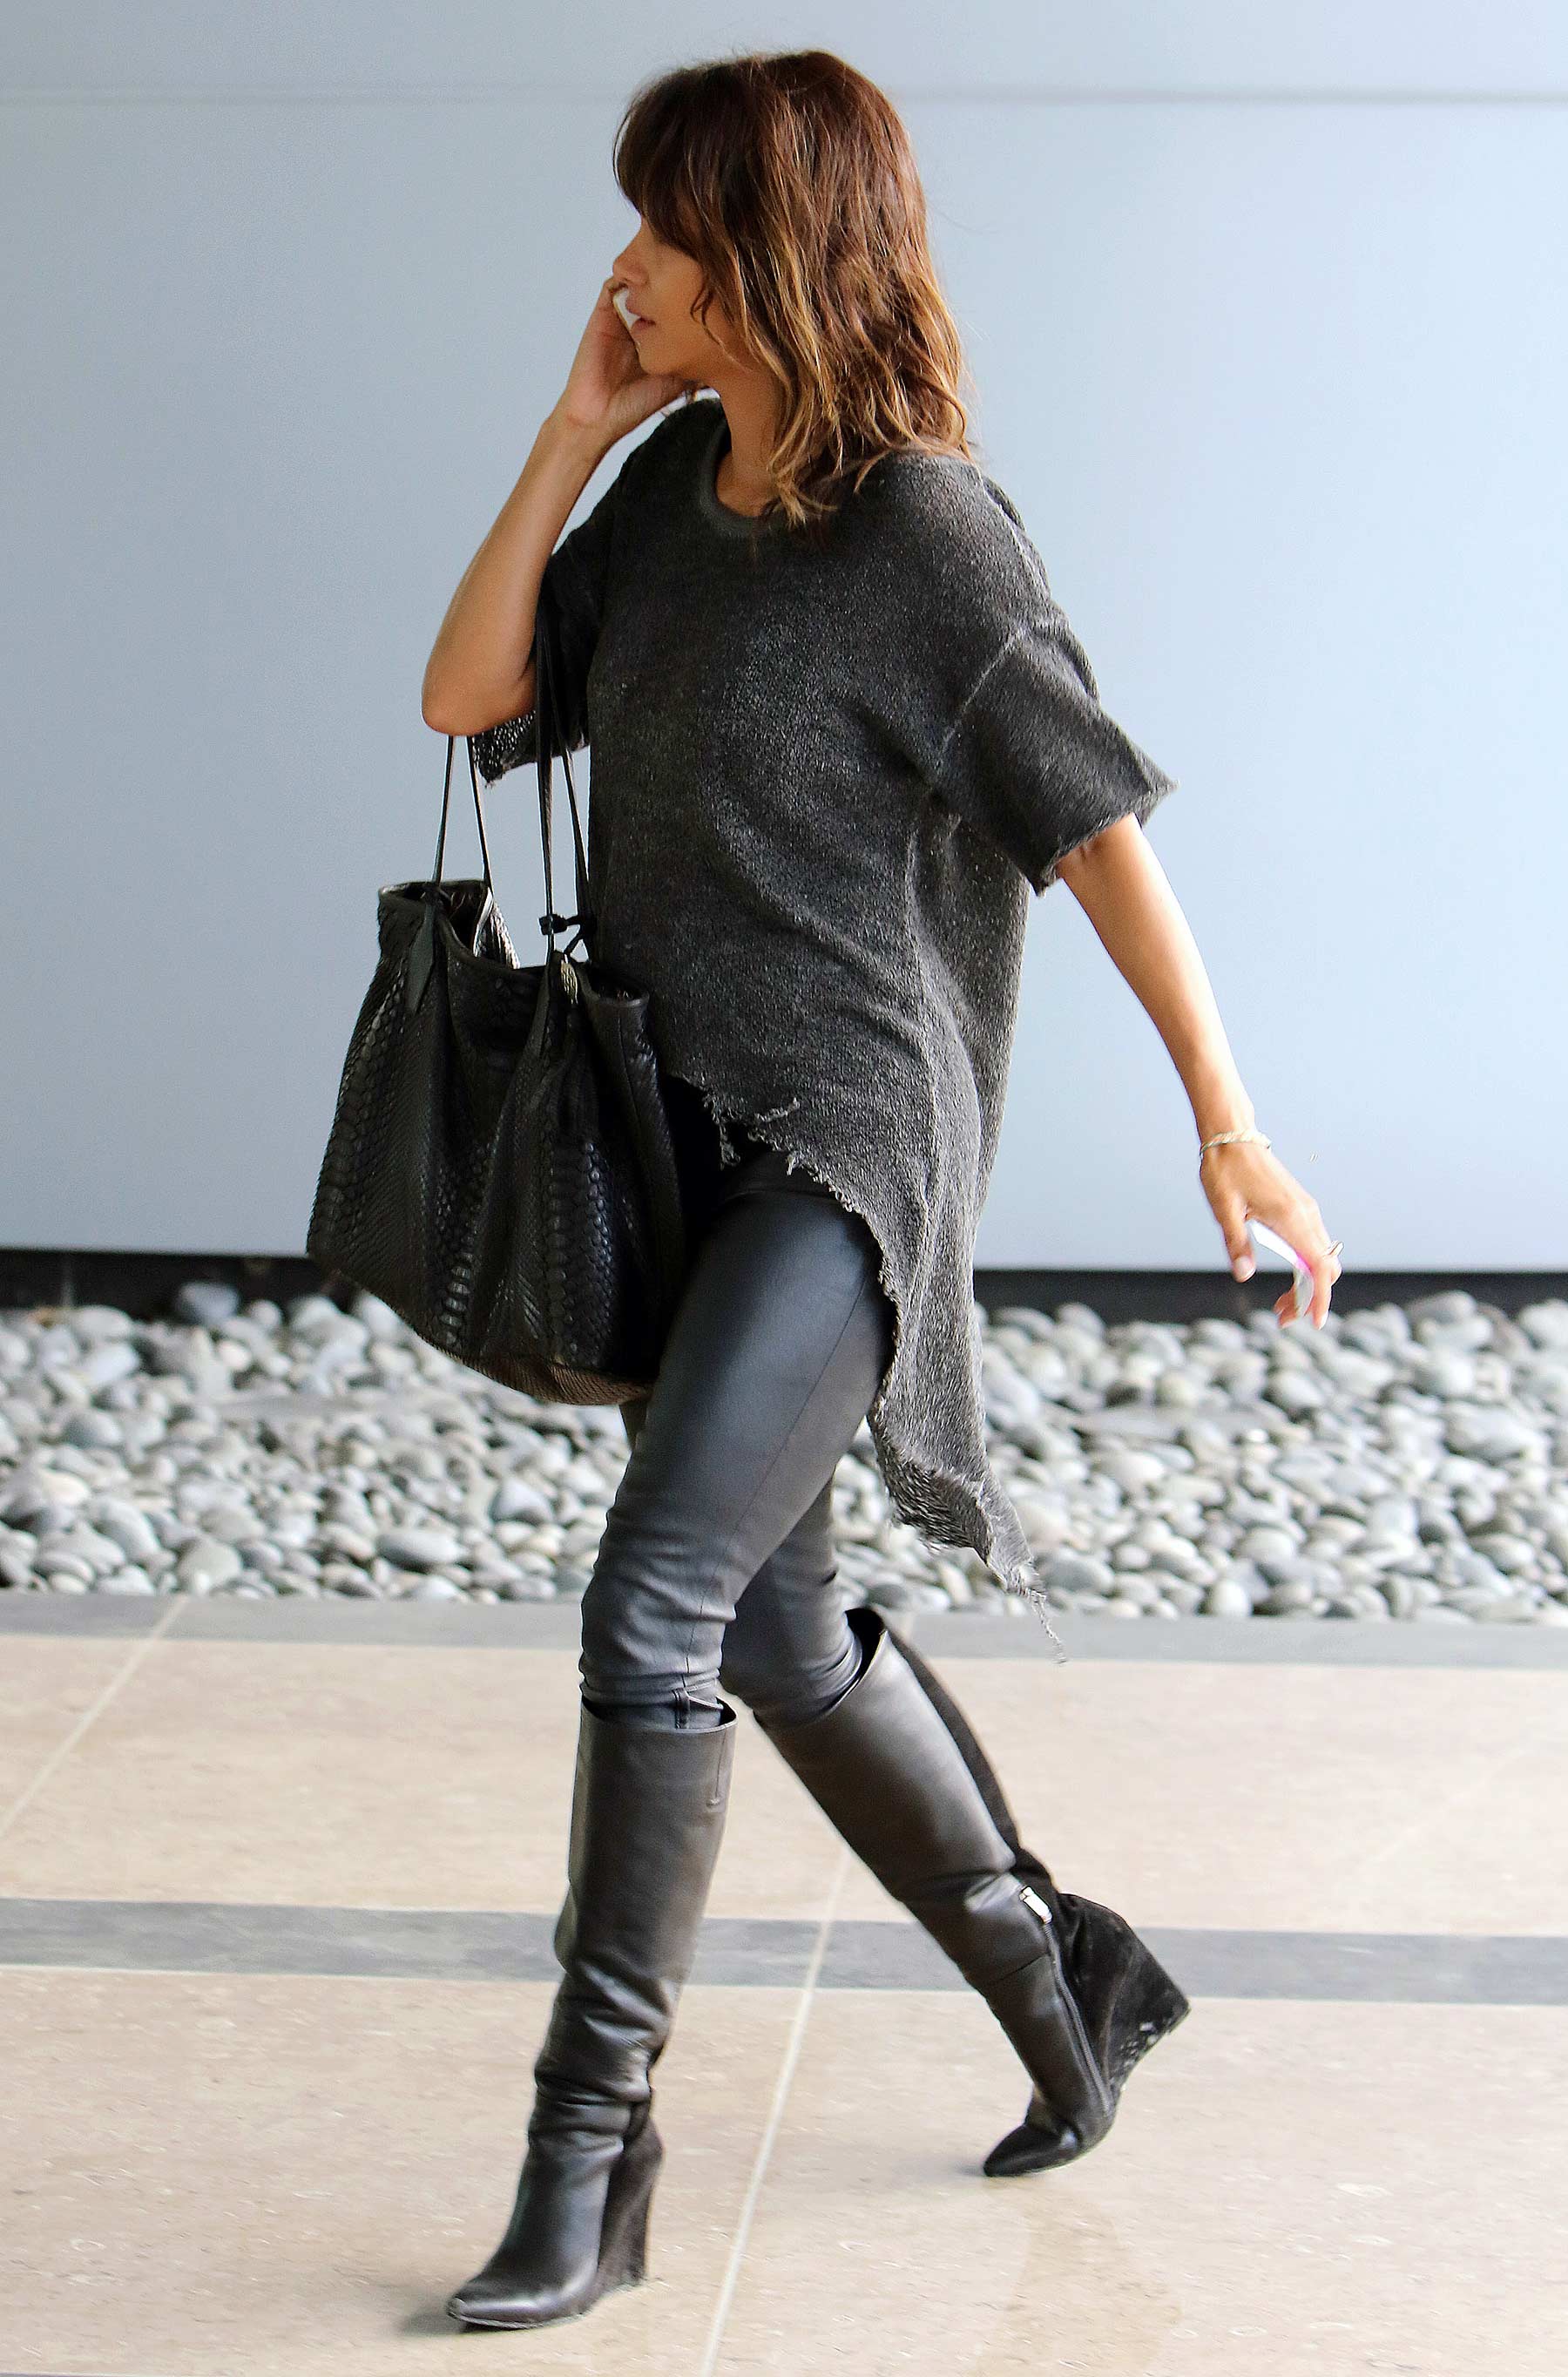 Halle Berry arriving for a meeting in Santa Monica